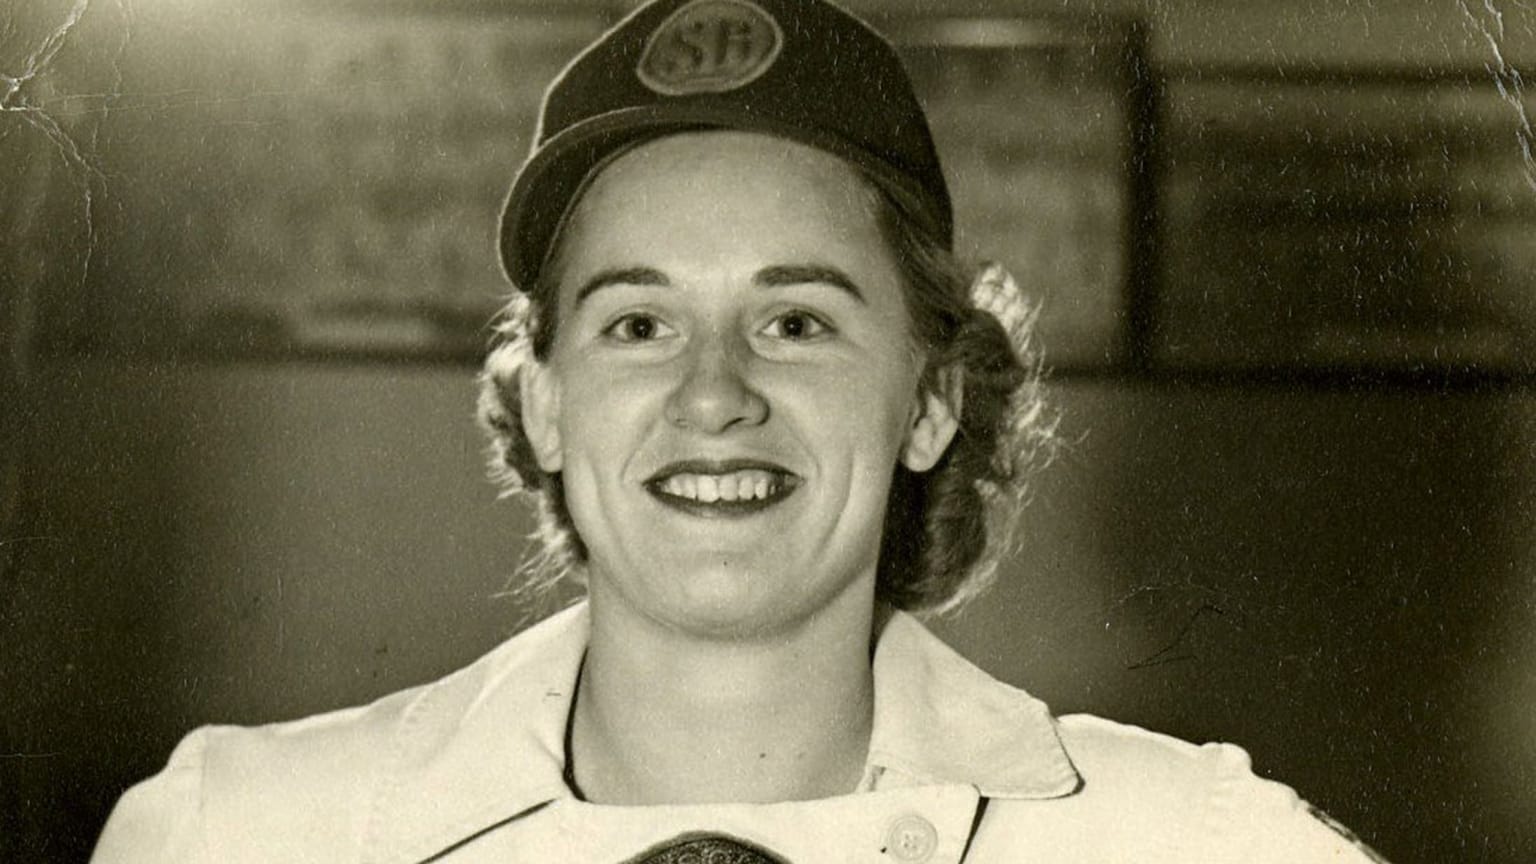 A black-and-white photo of a smiling woman in a baseball uniform